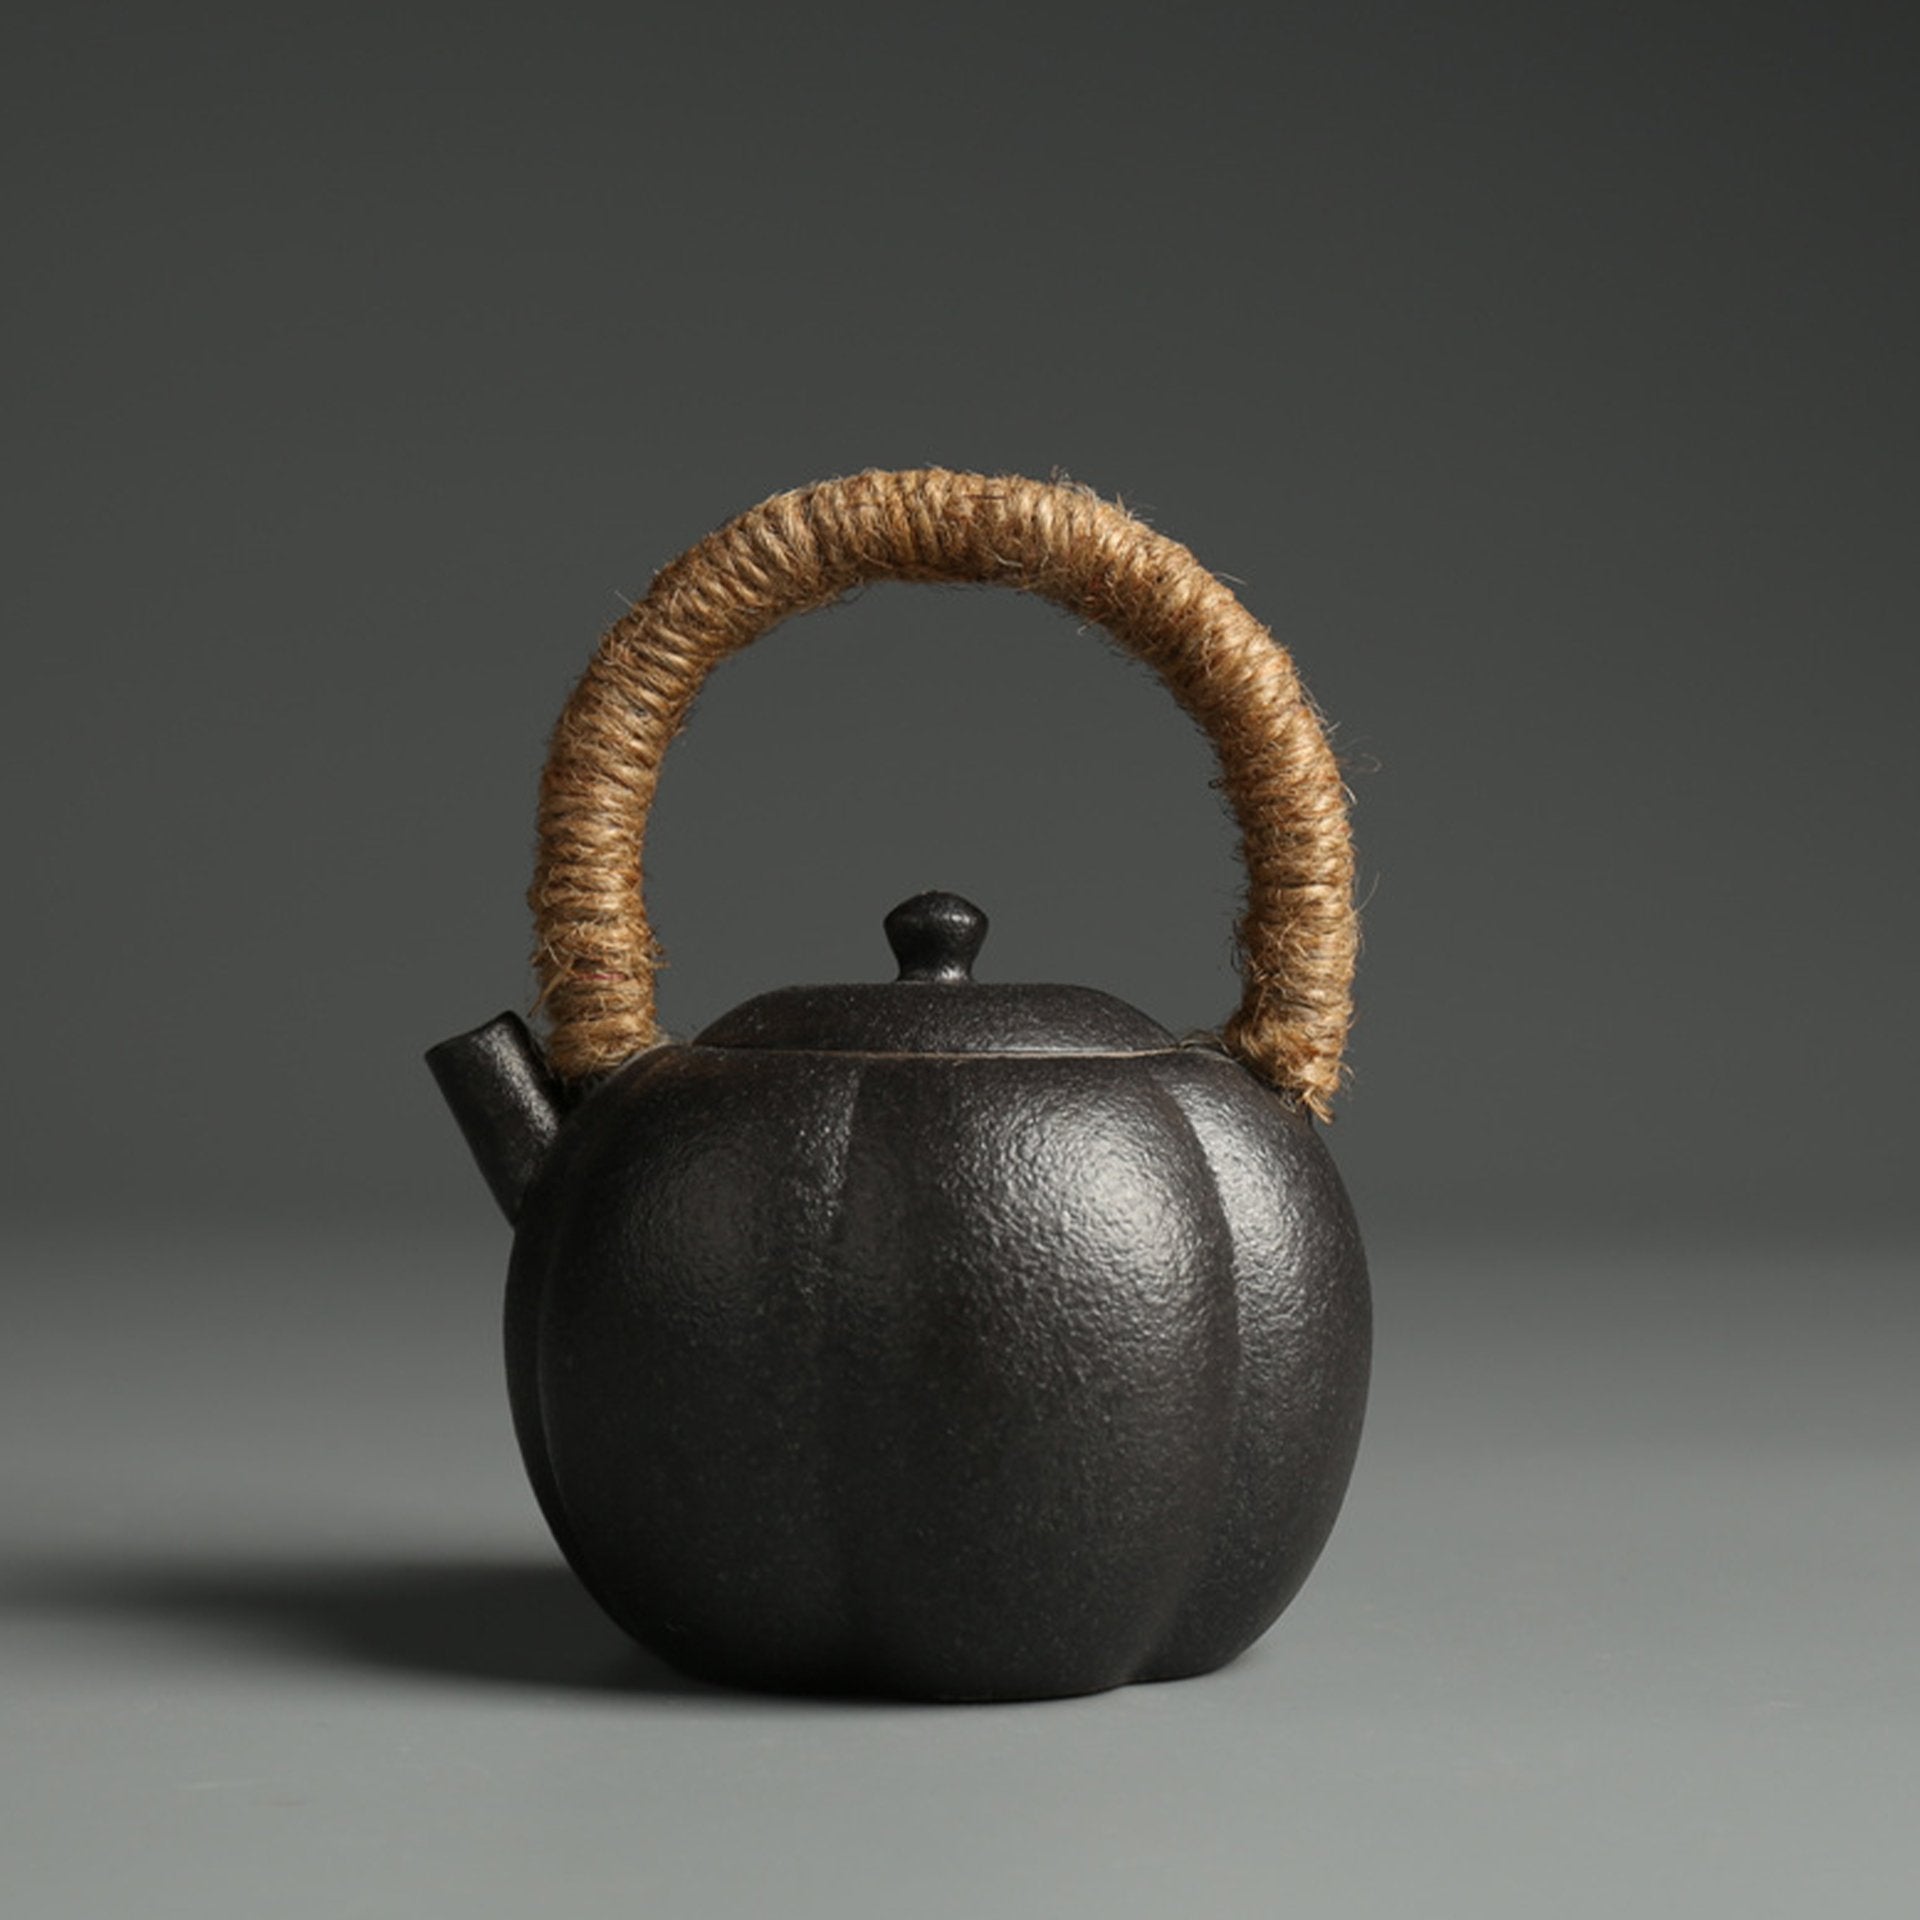 Black rounded teapot with a natural fiber handle against a dark background.